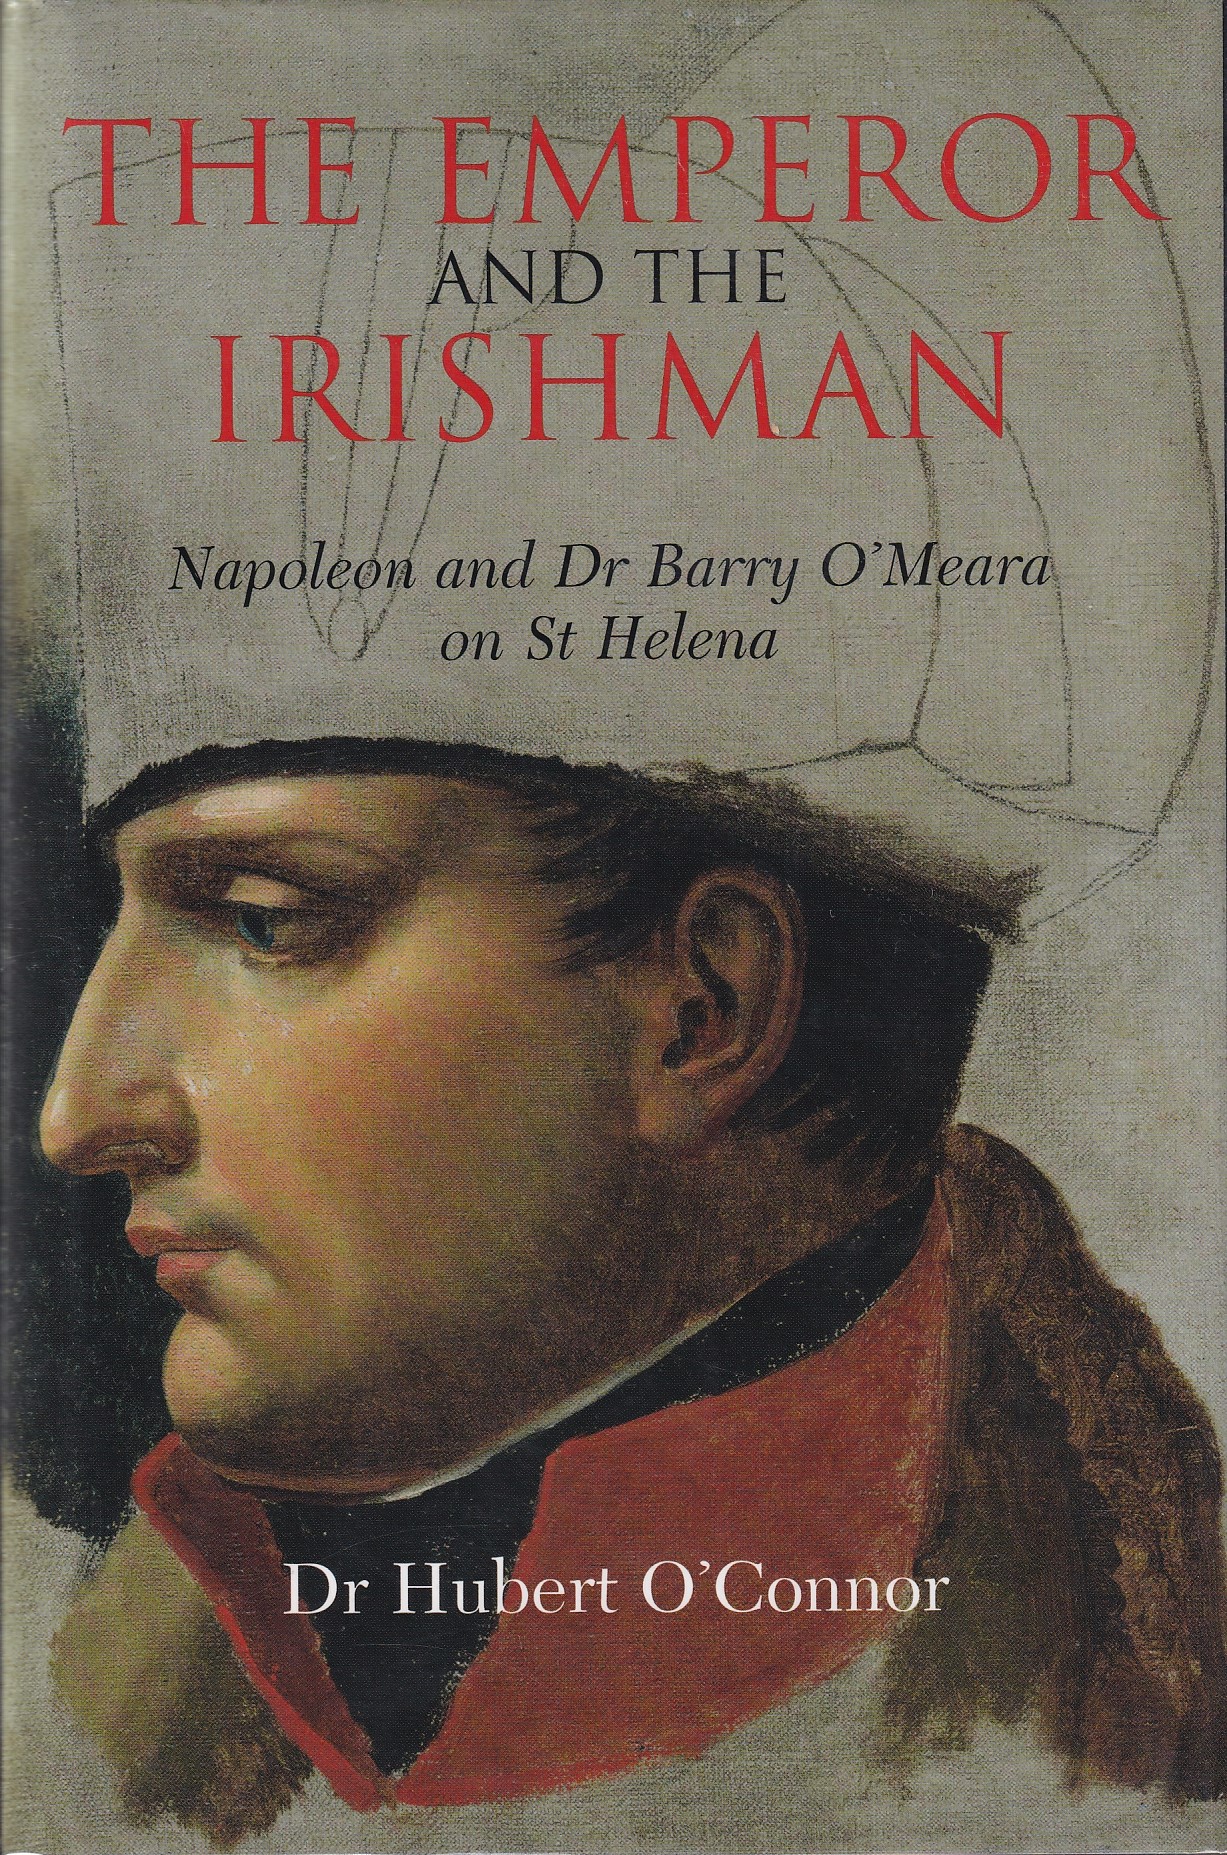 The Emperor and the Irishman: Napoleon and Dr Barry O’Meara on St Helena by Dr Hubert O'Connor